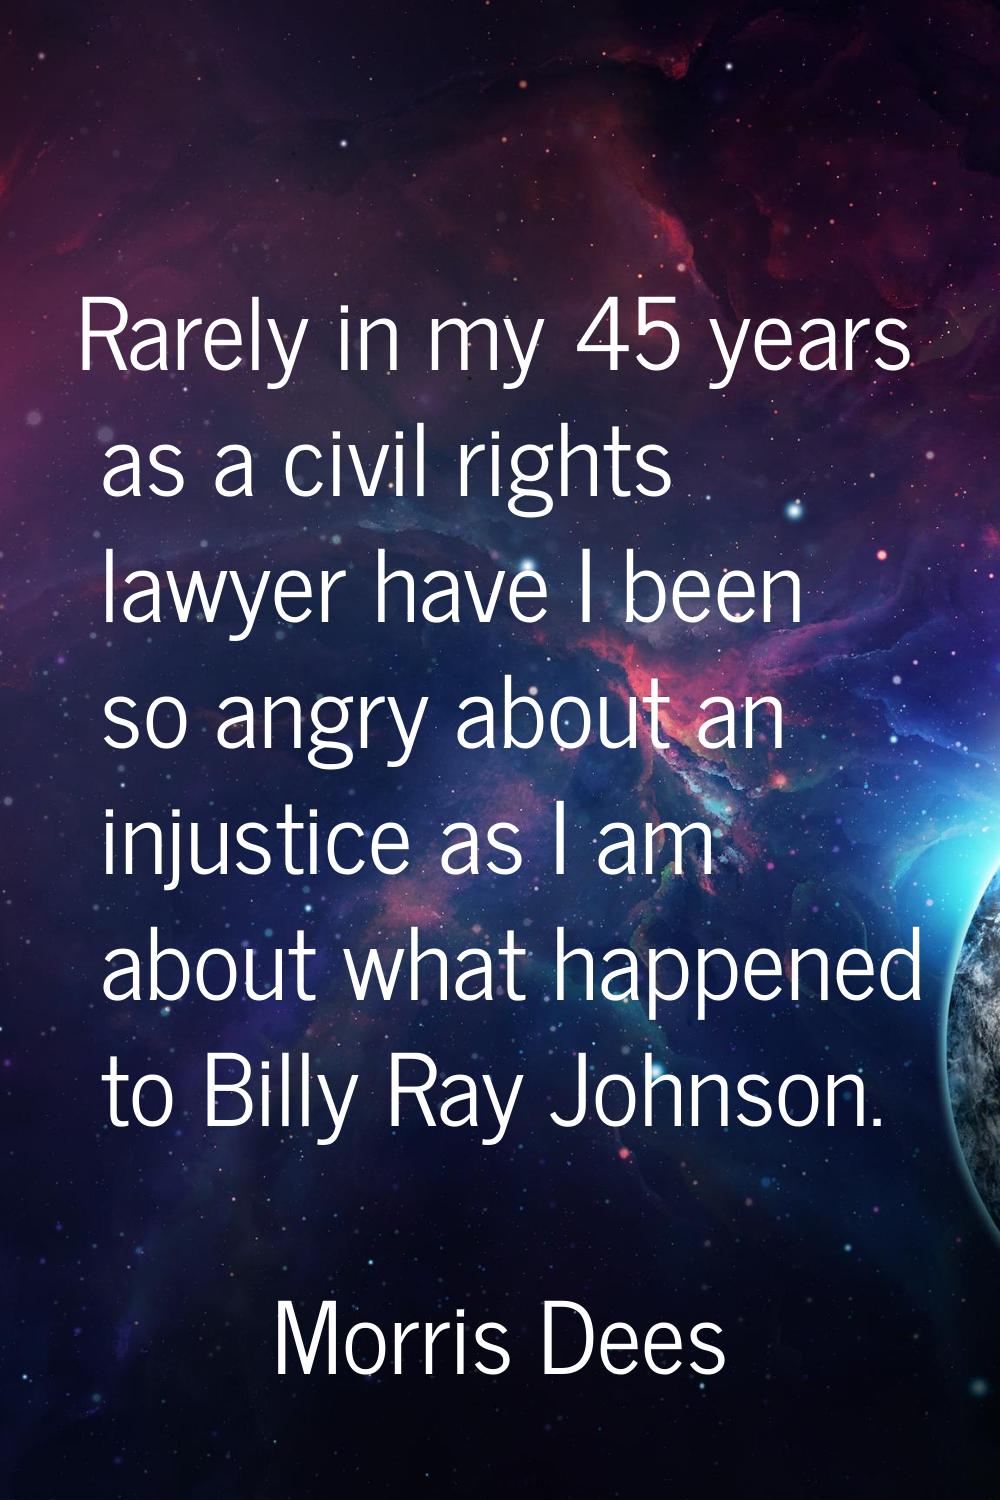 Rarely in my 45 years as a civil rights lawyer have I been so angry about an injustice as I am abou